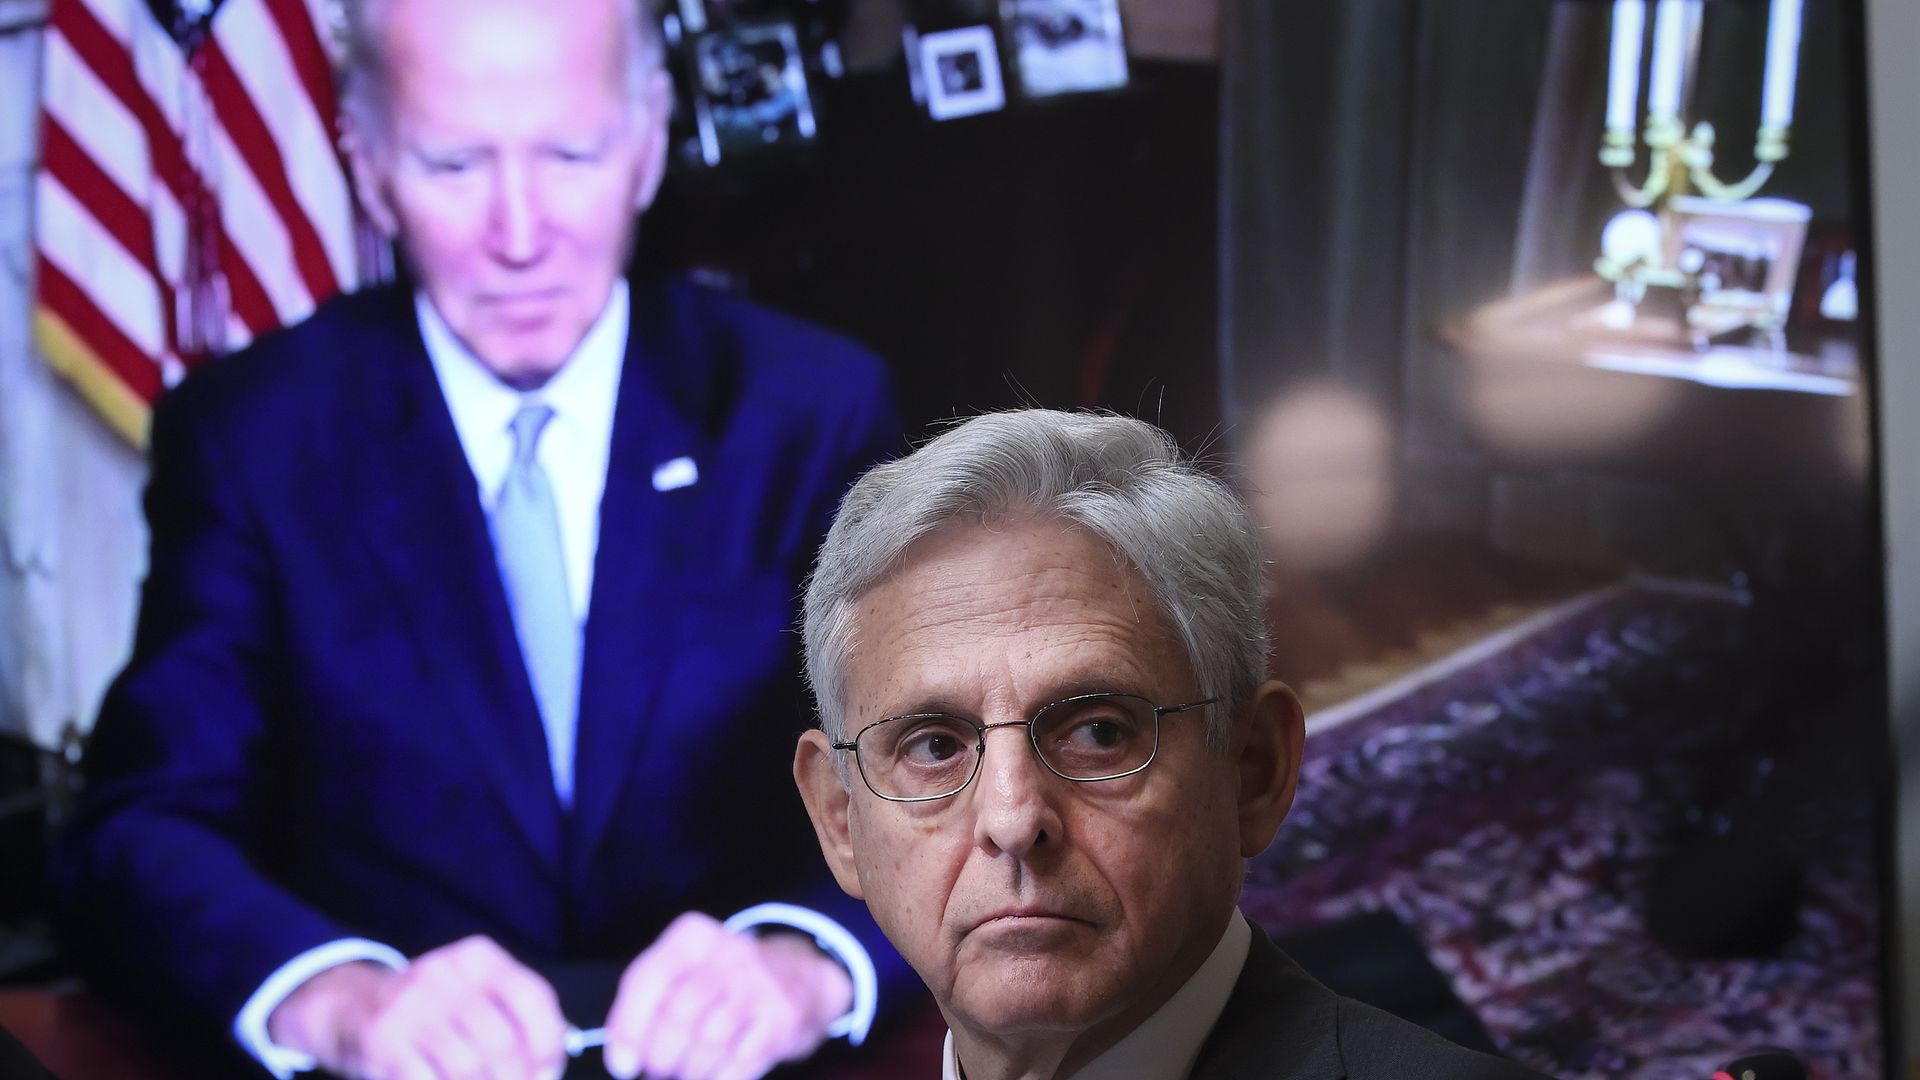 President Joe Biden, appearing via teleconference, looks on Attorney General Merrick Garland attends a meeting of the Task Force on Reproductive Healthcare Access during an event at the White House complex August 3, 2022 in Washington, DC. 